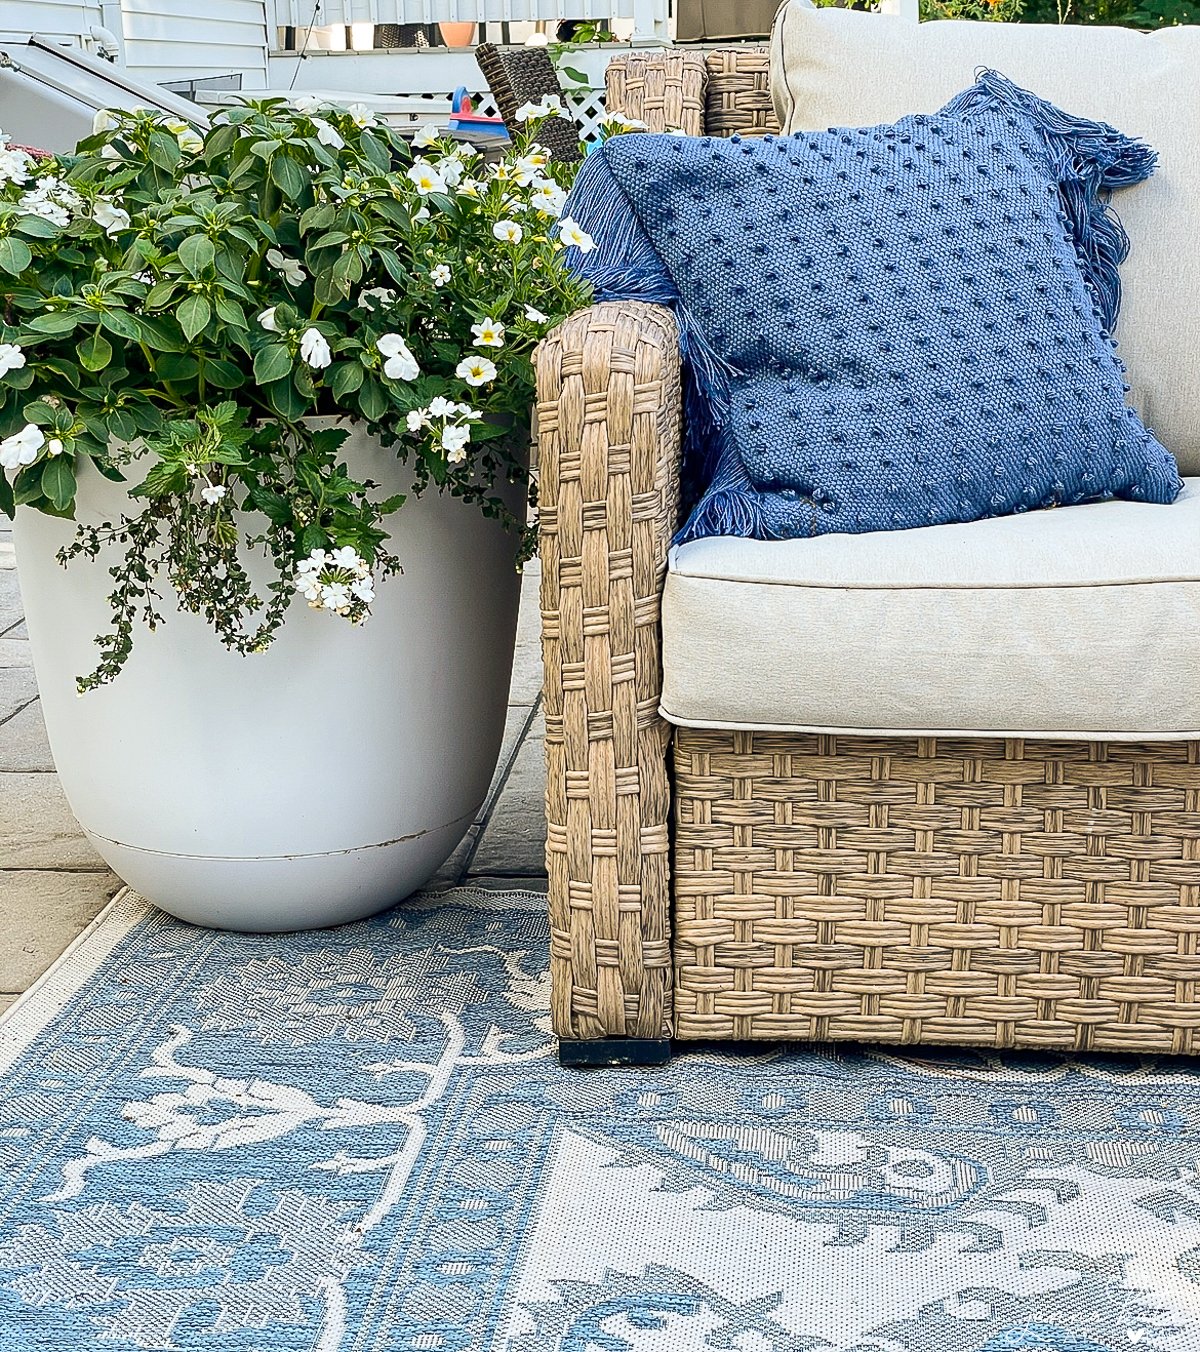 corner of the outdoor couch with a blue throw pillow and a planter of white flowers next to it